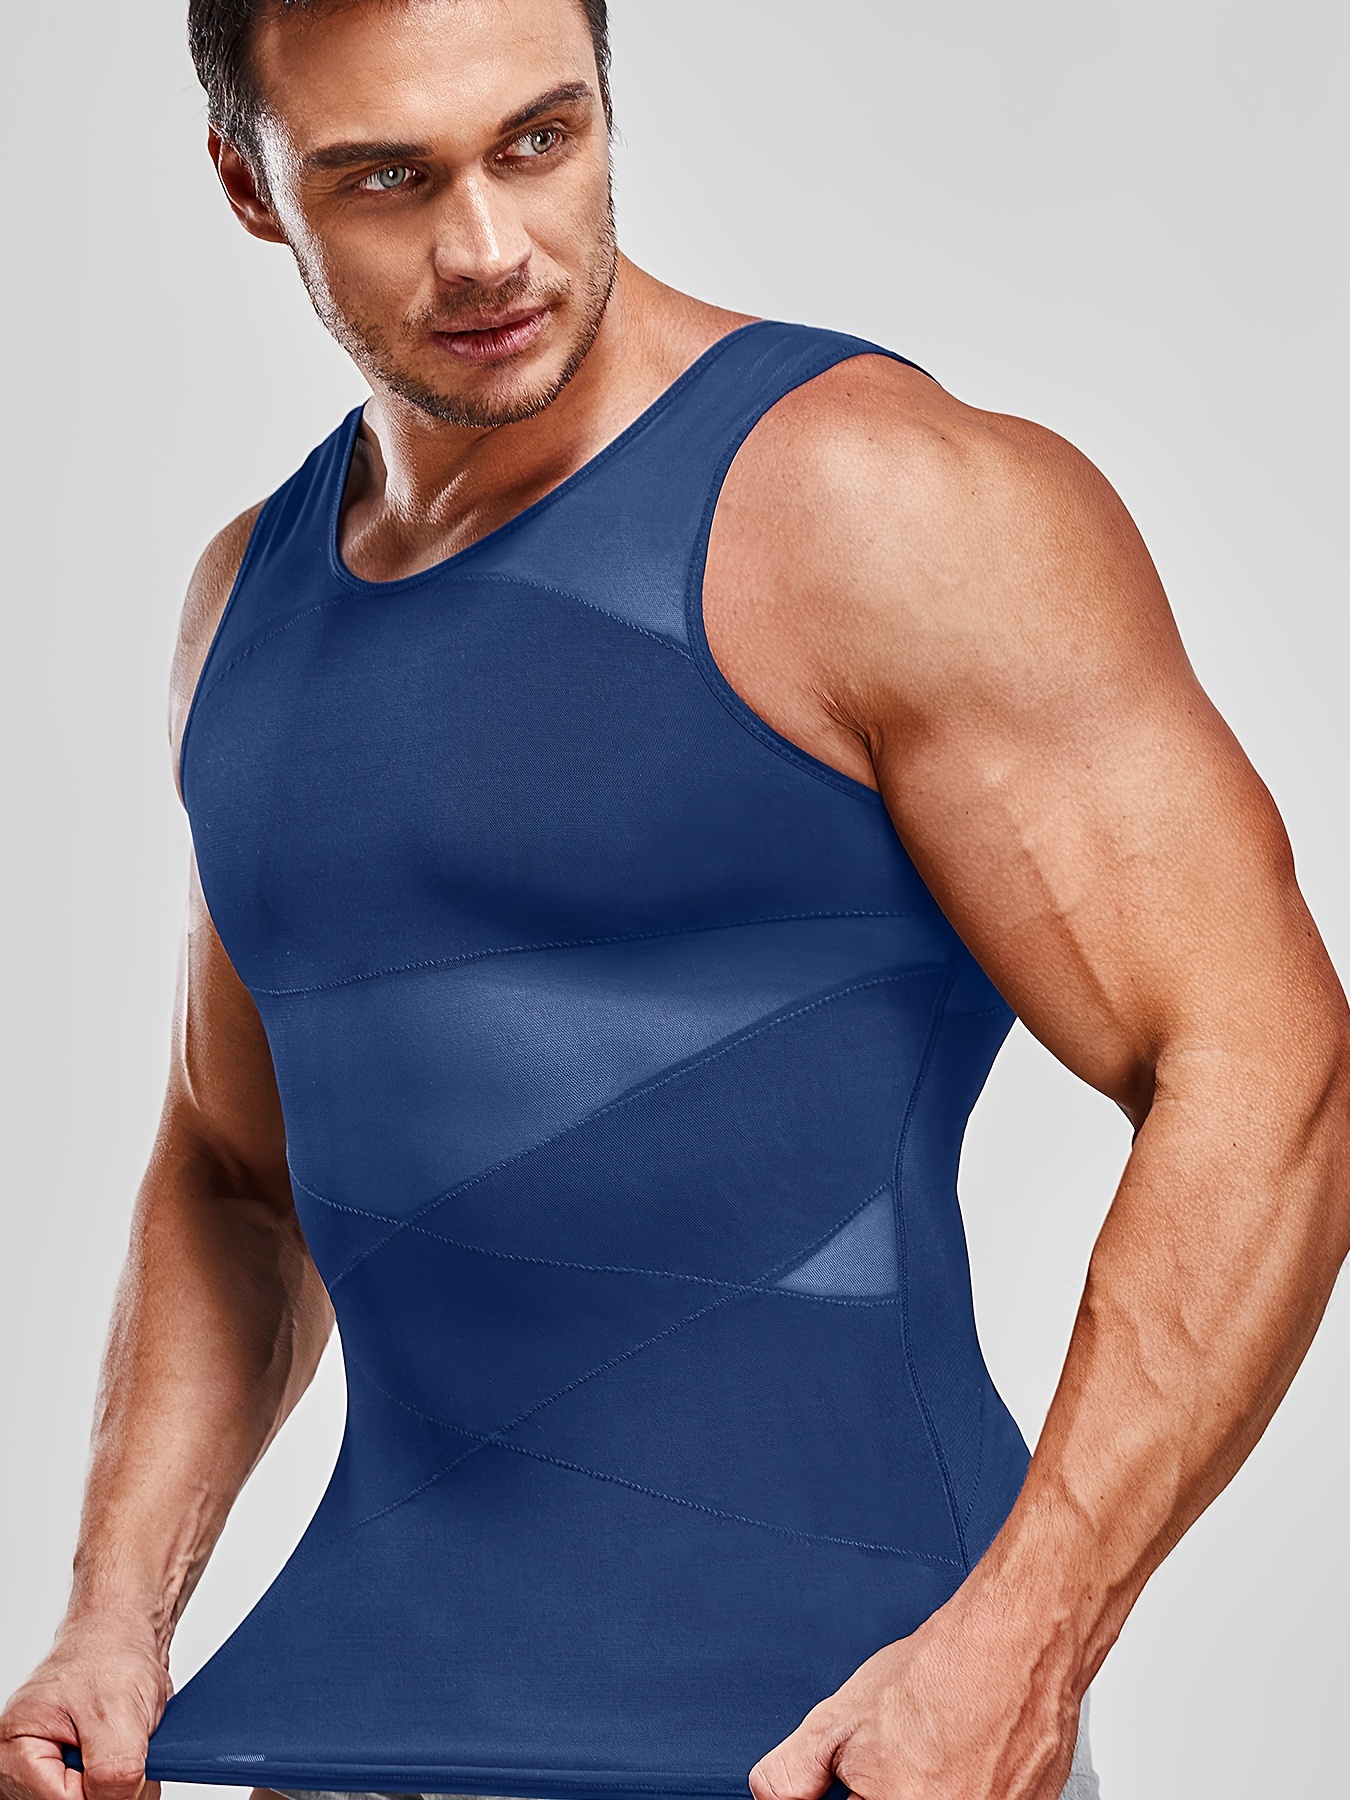 Cheap Men's Compression Shirt Slimming Body Shaper Vest Seamless Tummy  Control Waist Trainer Shapewear Tank Tops Undershirts for Weight Loss